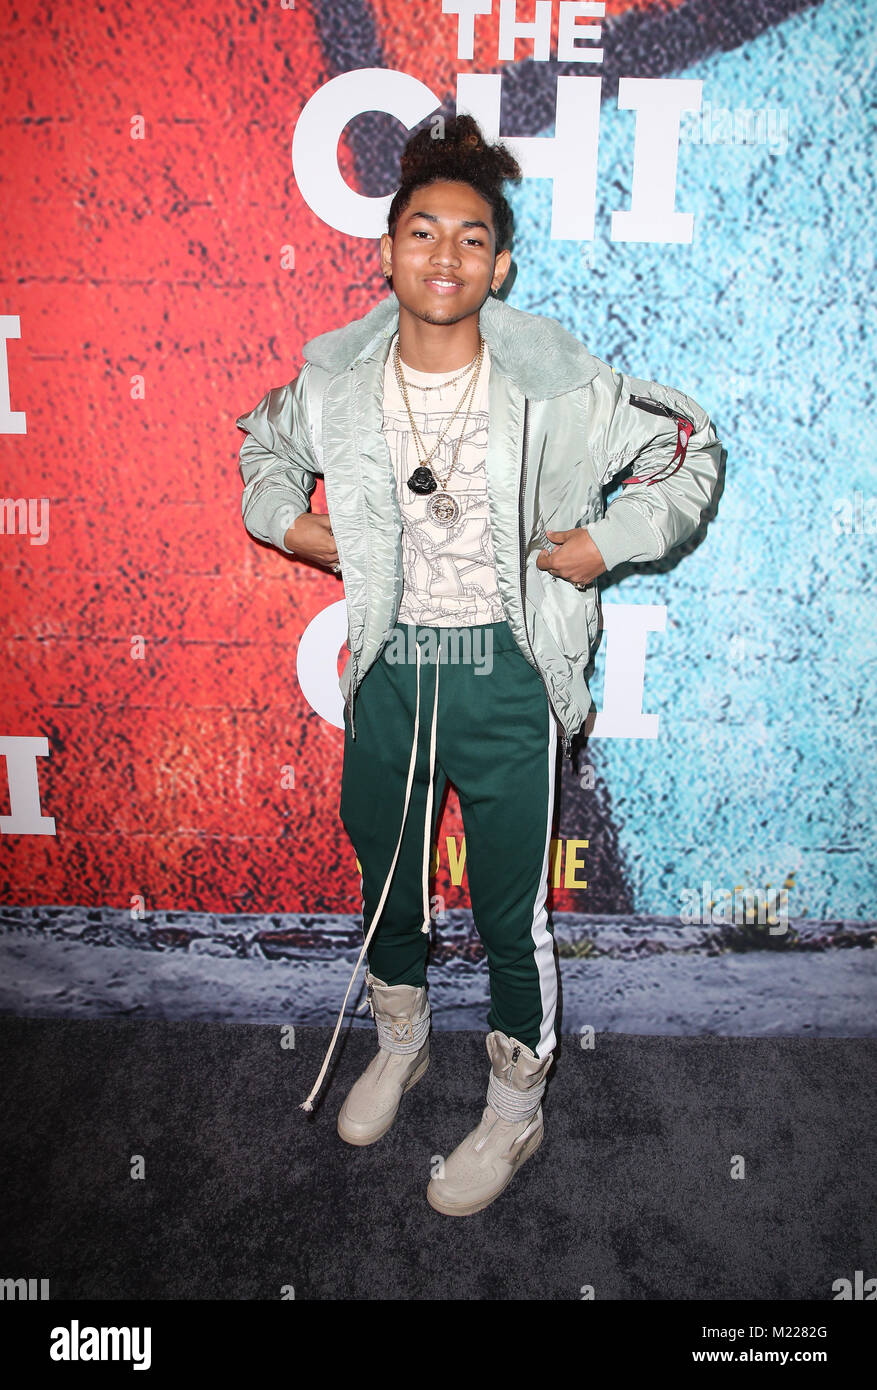 Premiere of Showtime's 'The Chi' at The Downtown Independent - Arrivals  Featuring: Jahking Guillory Where: Los Angeles, California, United States When: 03 Jan 2018 Credit: FayesVision/WENN.com Stock Photo